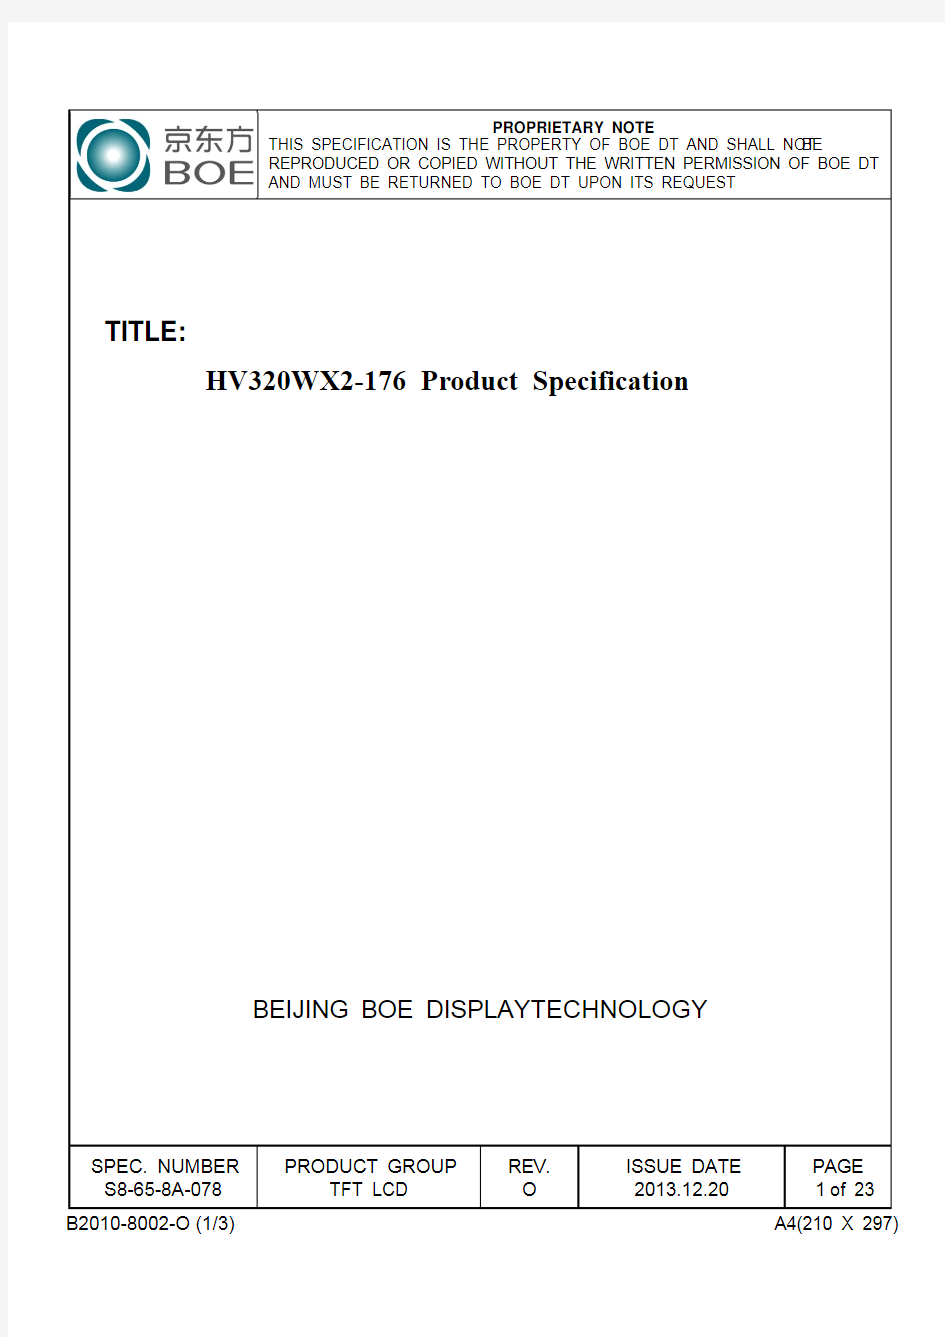 HV320WX2-176 Product Specification_Rev.O_20131220